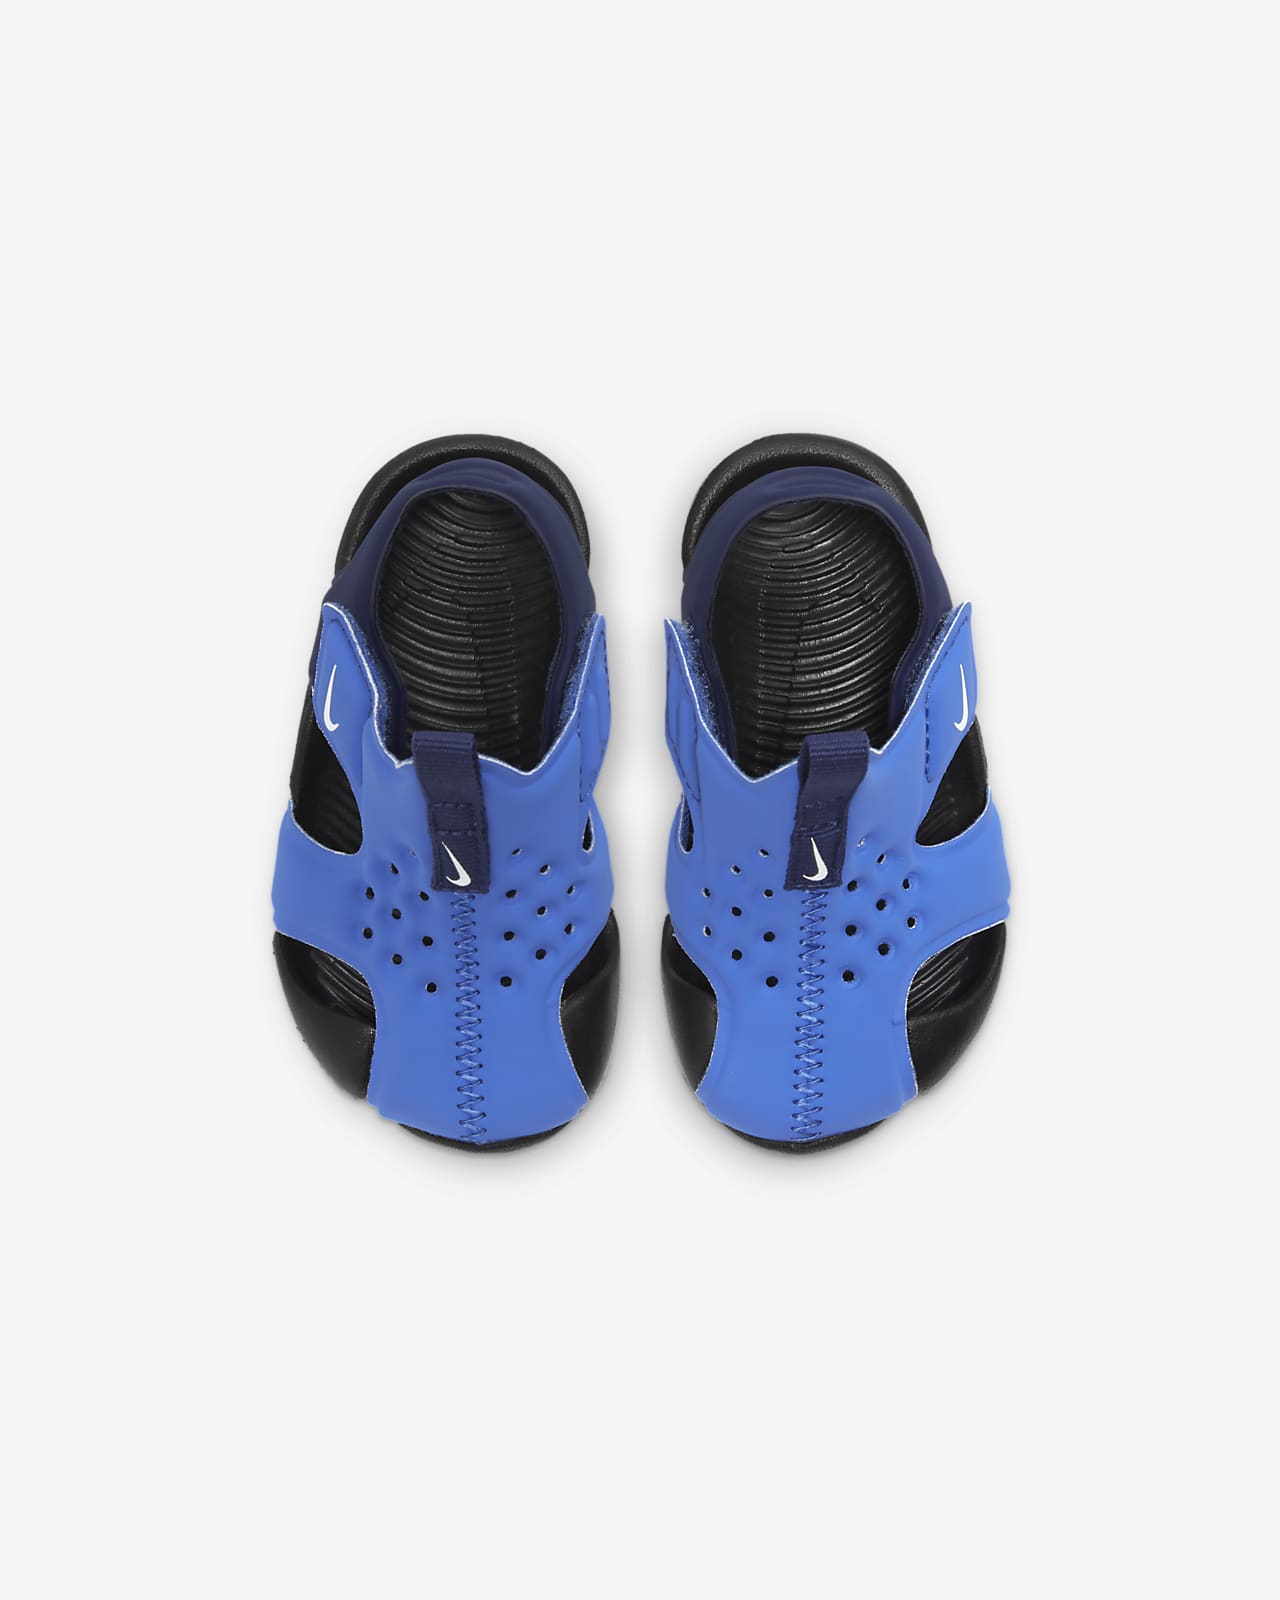 baby infant nike sandals